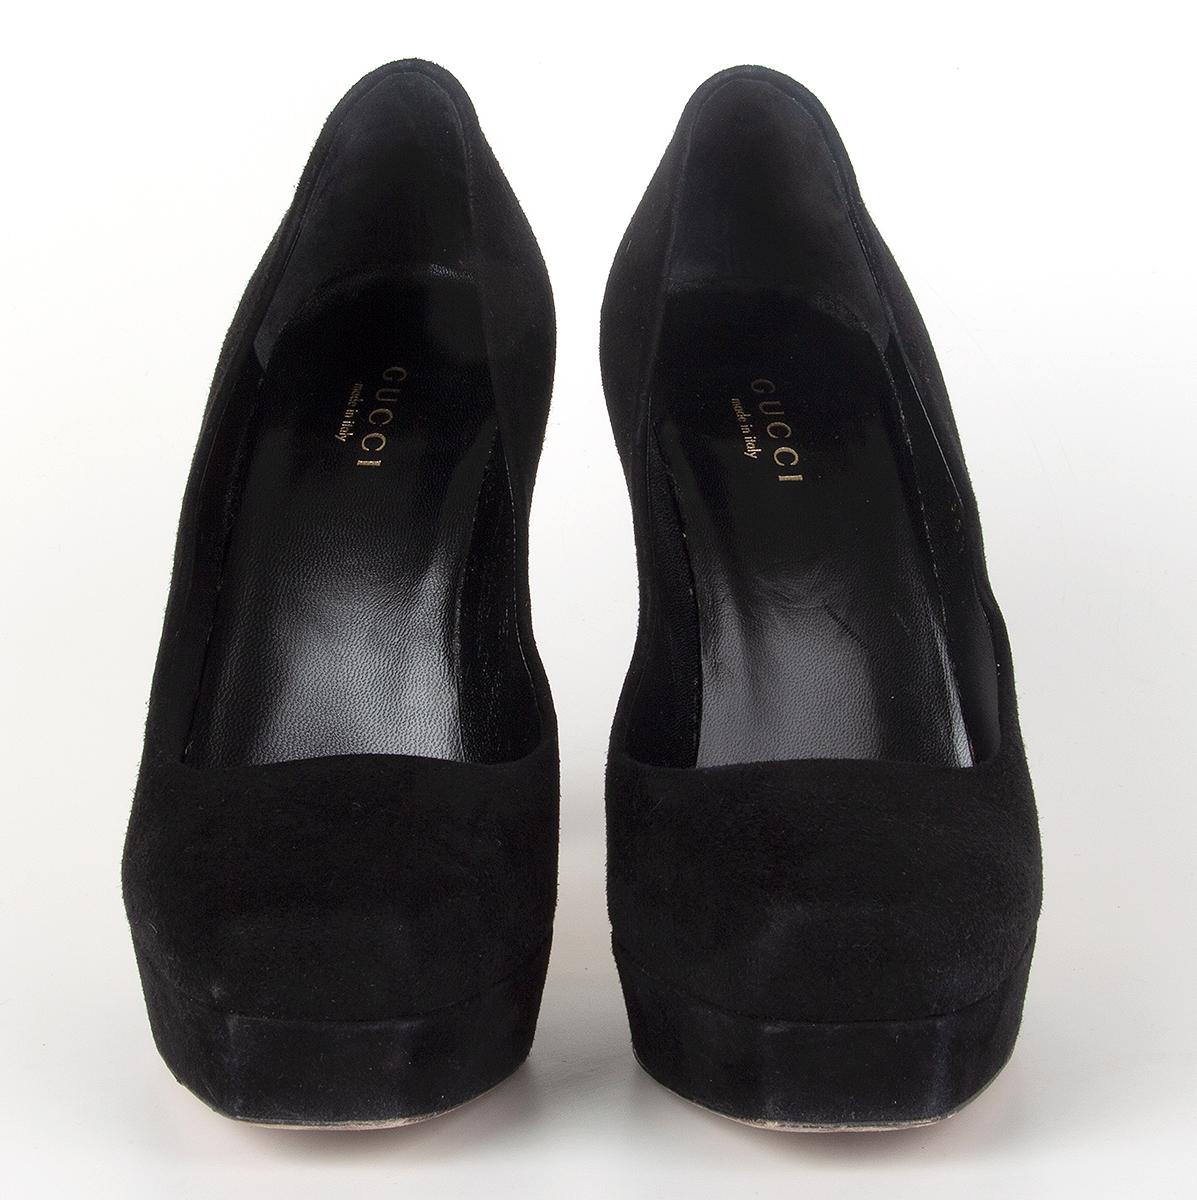 100% authentic Gucci square-toe platform pumps in black suede. Have been worn and are in excellent condition. Come with dust bag. 

Measurements
Imprinted Size	35.5
Shoe Size	35.5
Inside Sole	23cm (9in)
Width	7cm (2.7in)
Heel	11.5cm